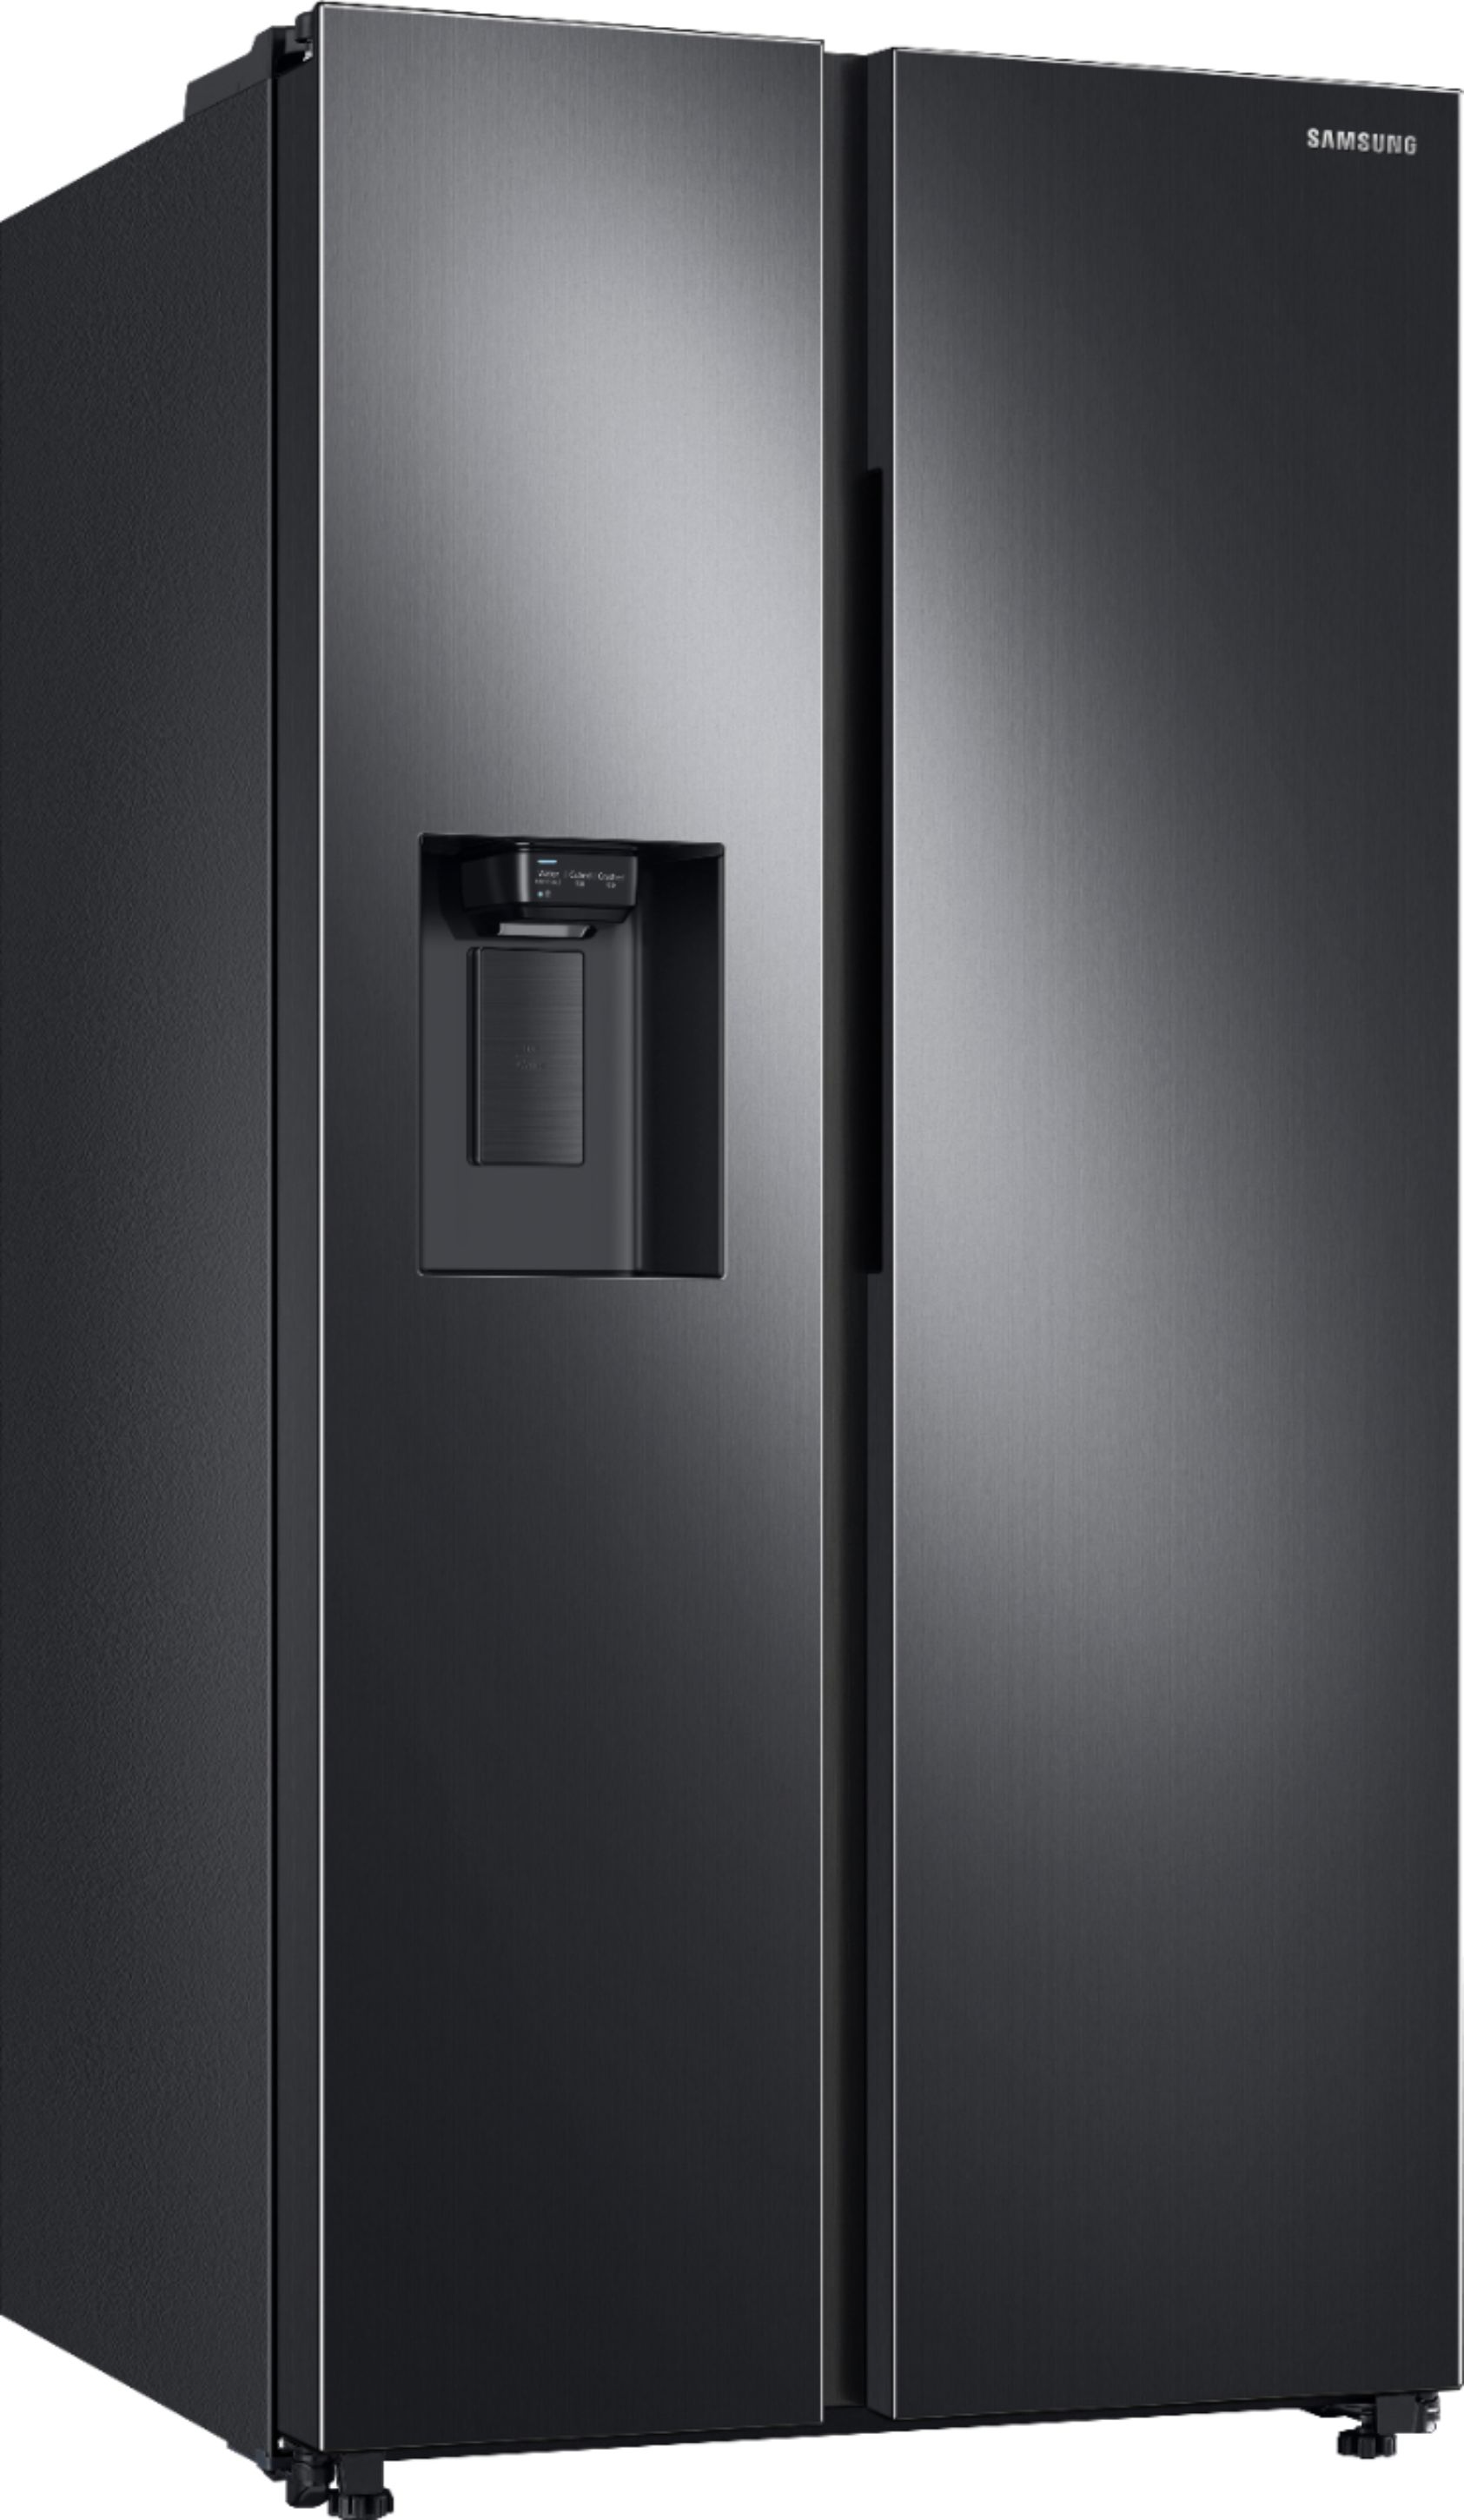 Angle View: Samsung - 7.6 cu. ft. Kimchi & Specialty 2-Door Chest Refrigerator - Silver